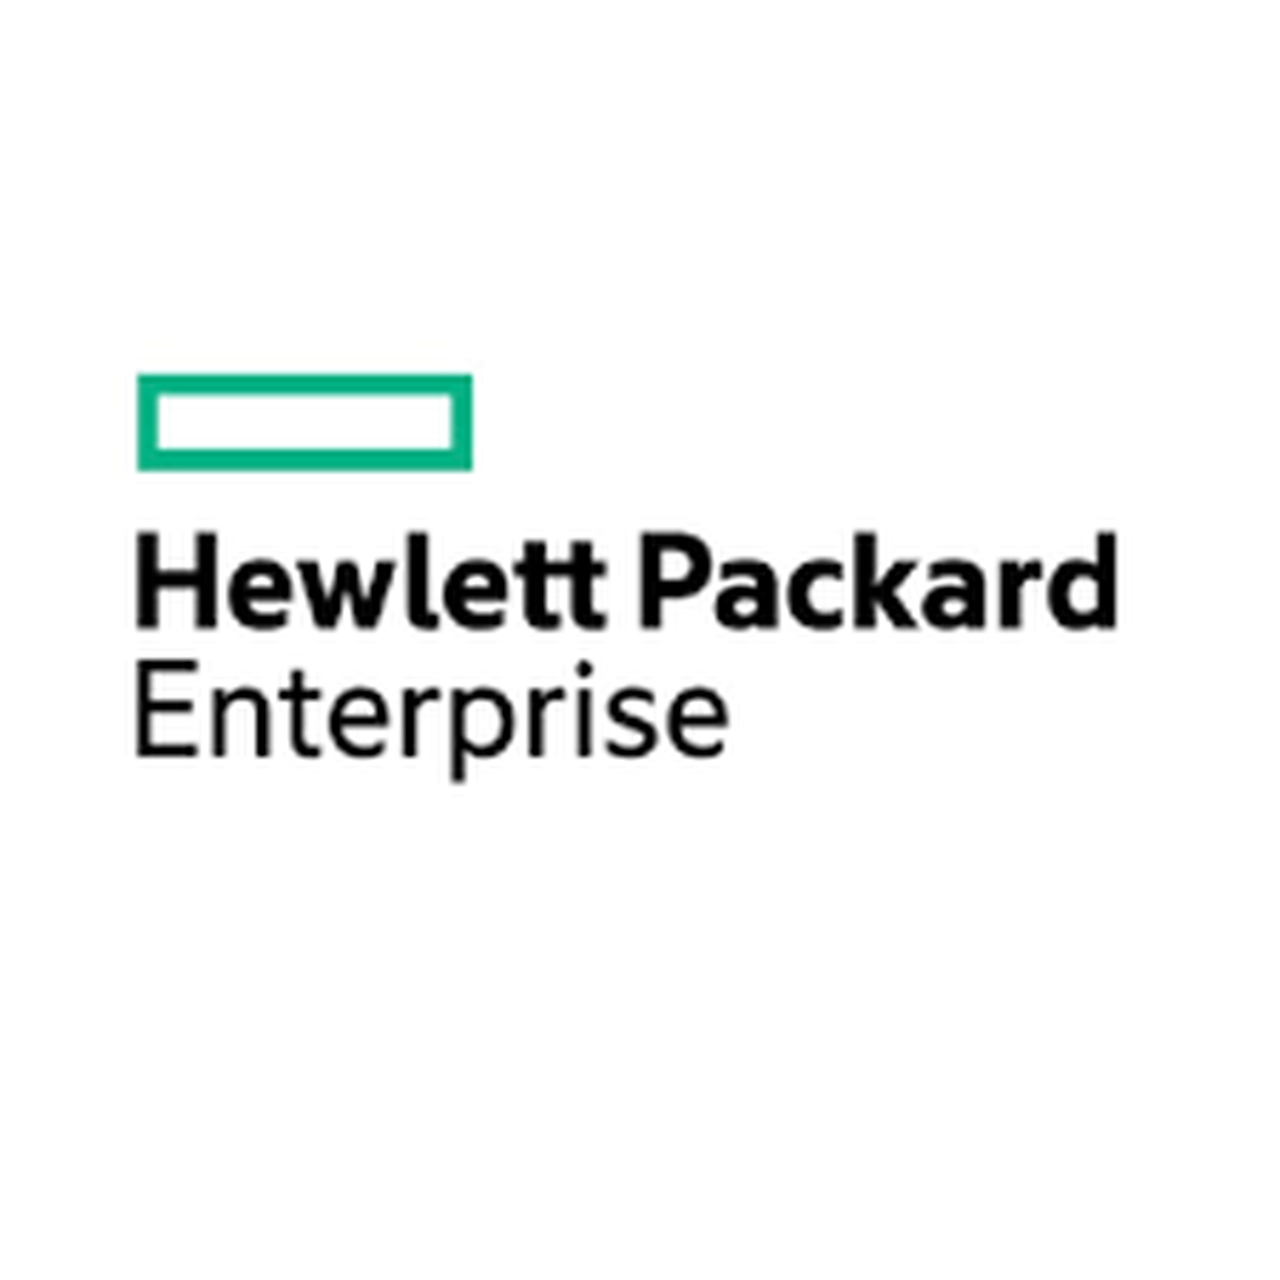 HPE 800W FS Univ Ht Plg LH Pwr Sply Kit Factory integrated